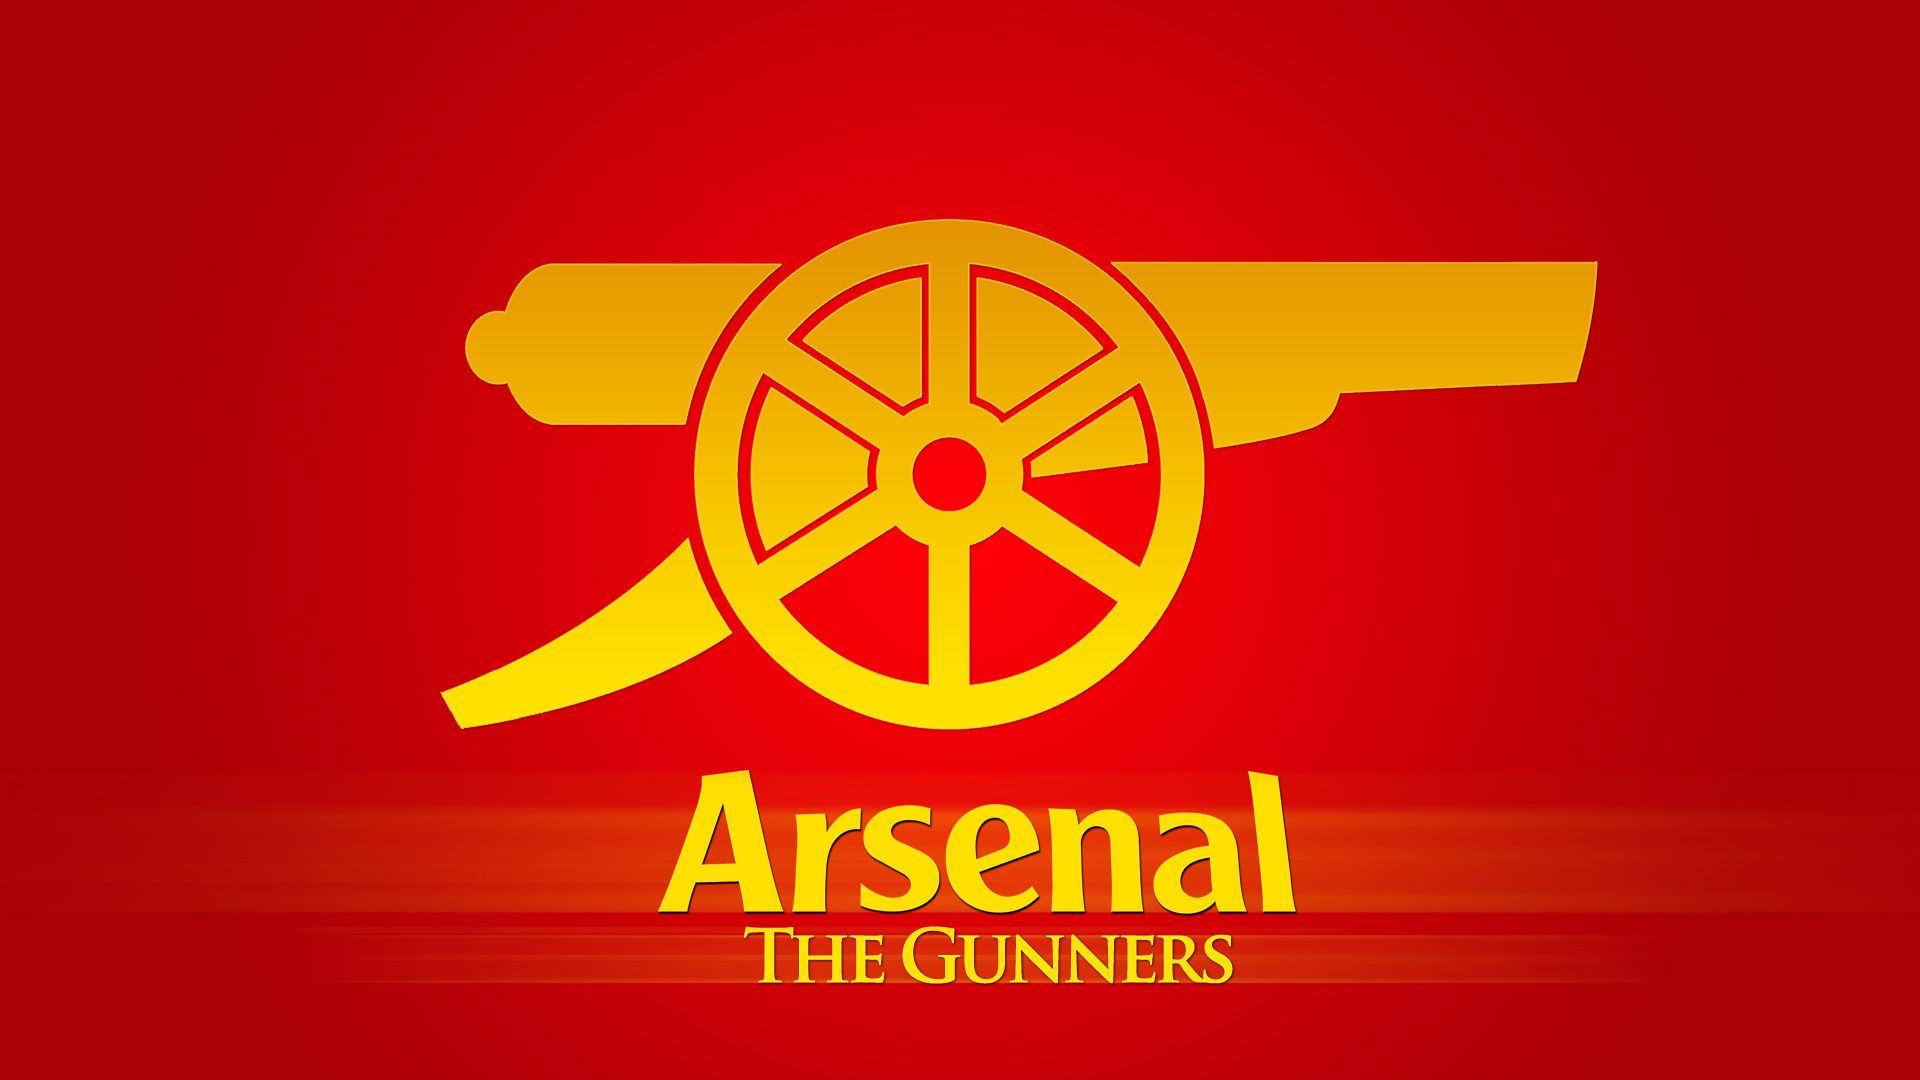 Arsenal FC Logo On Red Background The Gunners 1920x1080 HD Soccer / Football / Arsenal FC